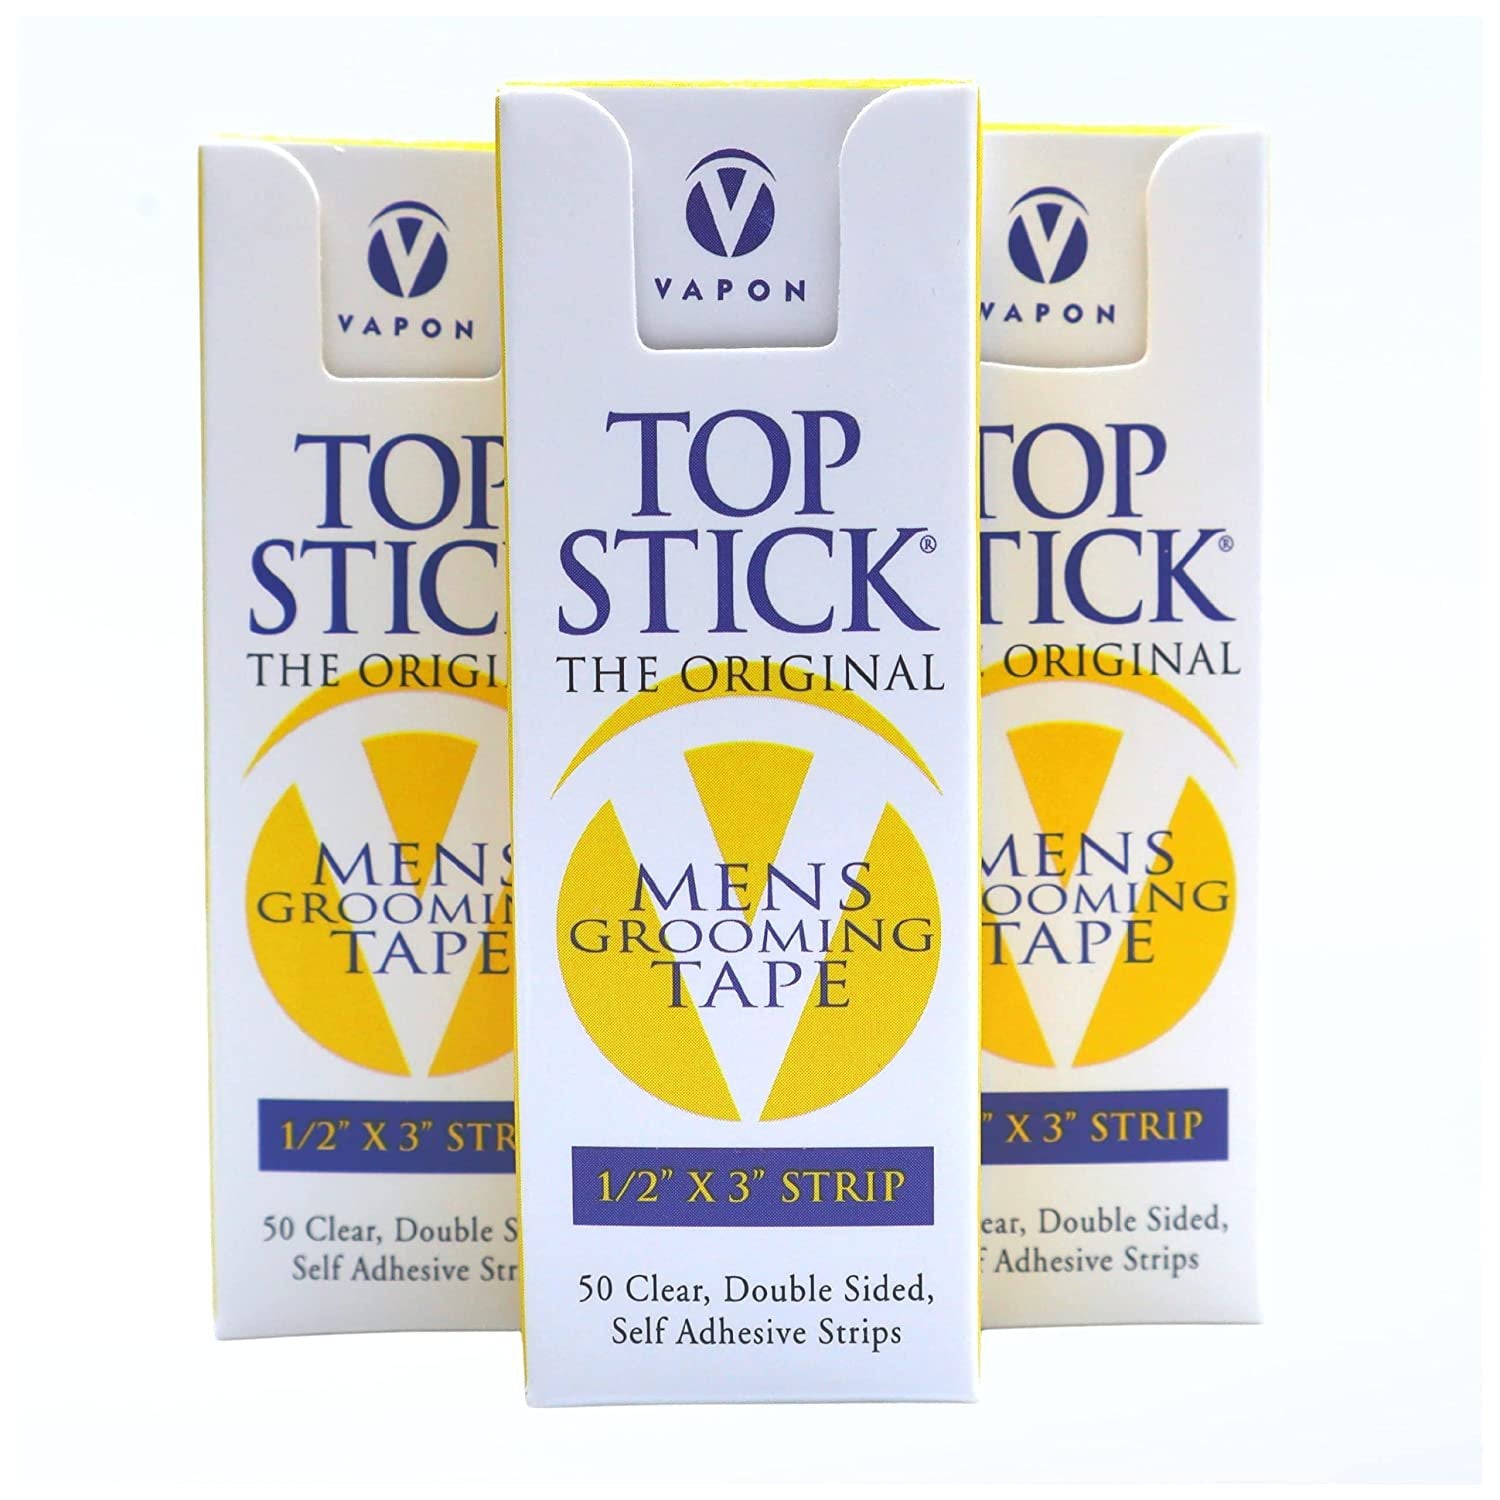 Vapon Topstick - The Original Men's Grooming Tape - 150 Count 3 Boxes 1/2" x 3" Double Sided, Self Adhesive, Clear Tape for Toupee and Wig Adhesion - Hypo Allergenic, Waterproof, and Latex Free